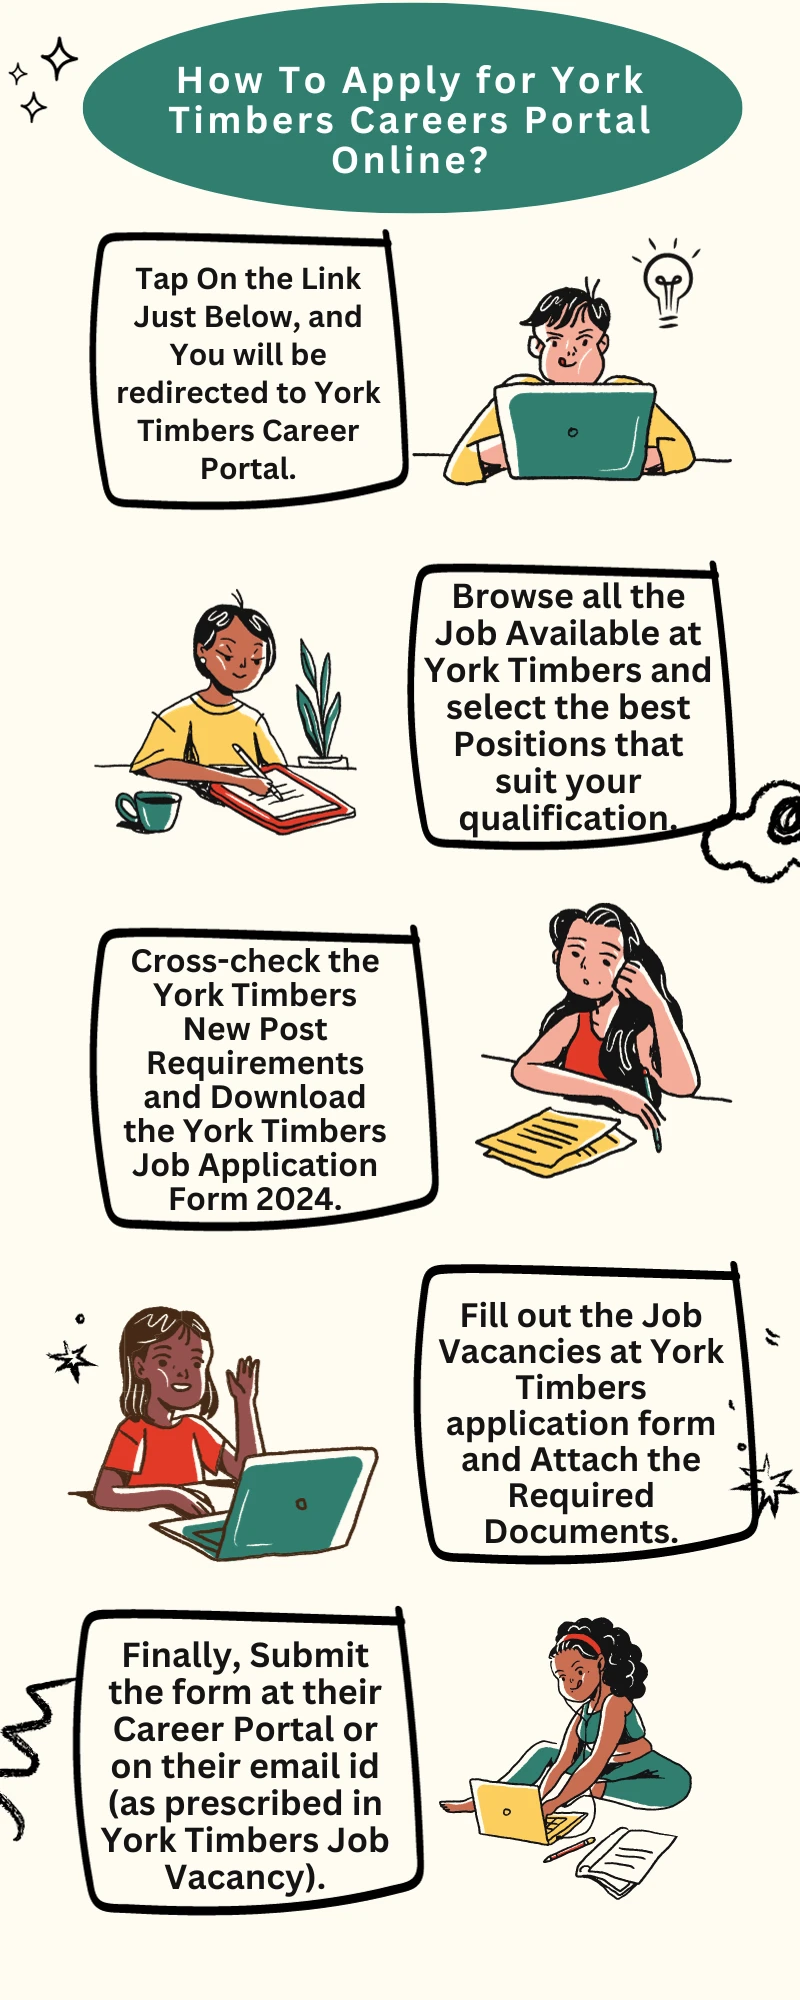 How To Apply for York Timbers Careers Portal Online?